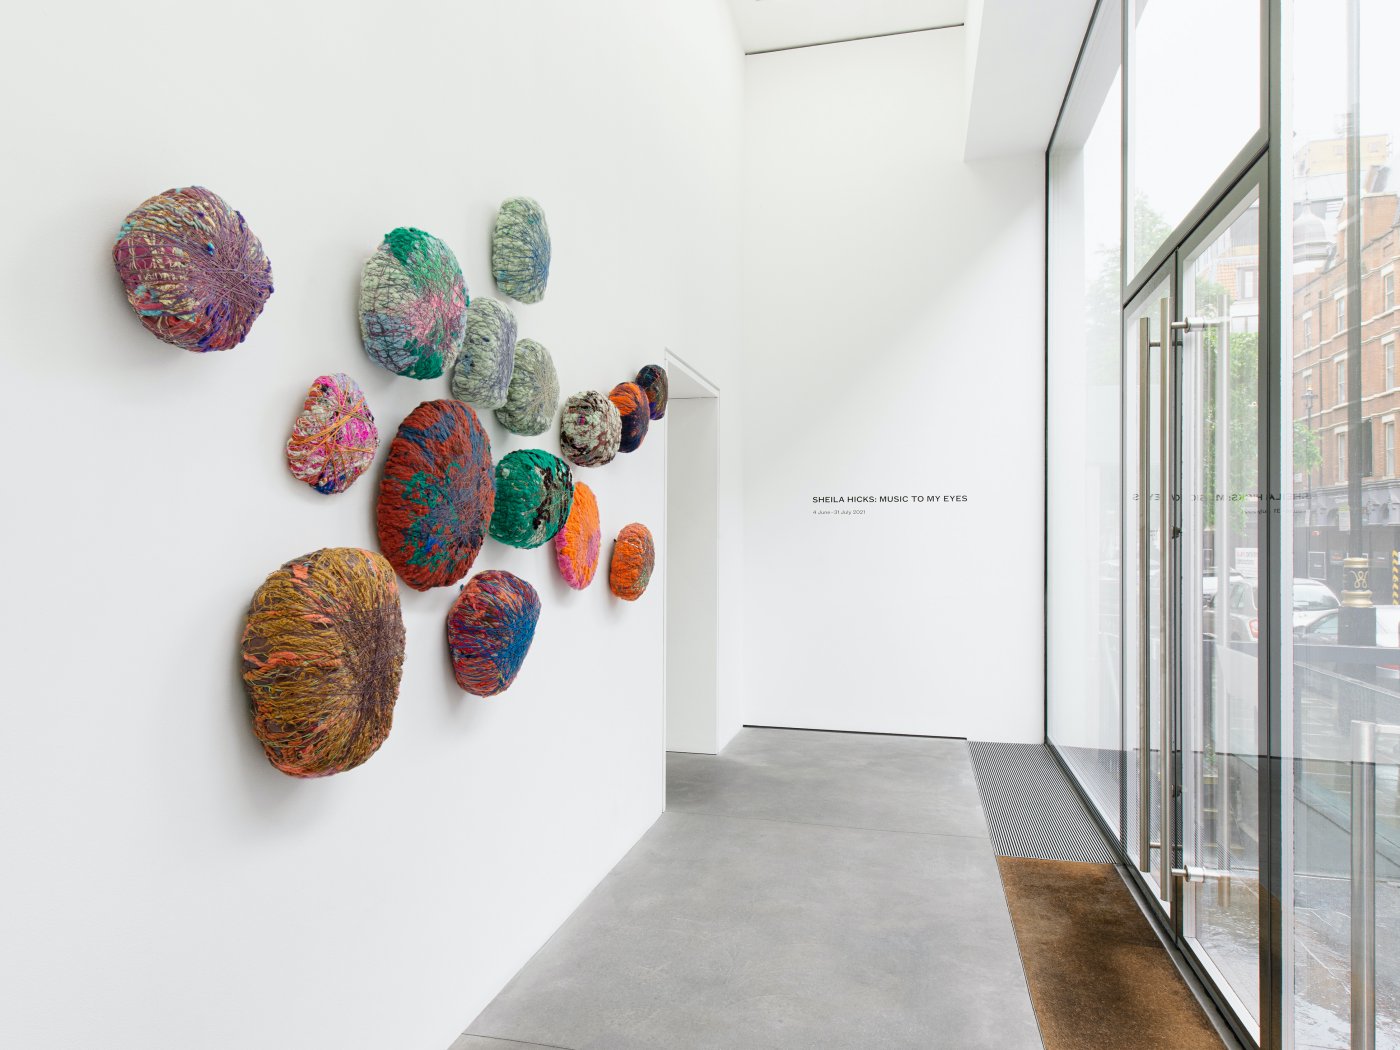 Installation image for Sheila Hicks: Music to My Eyes, at Alison Jacques